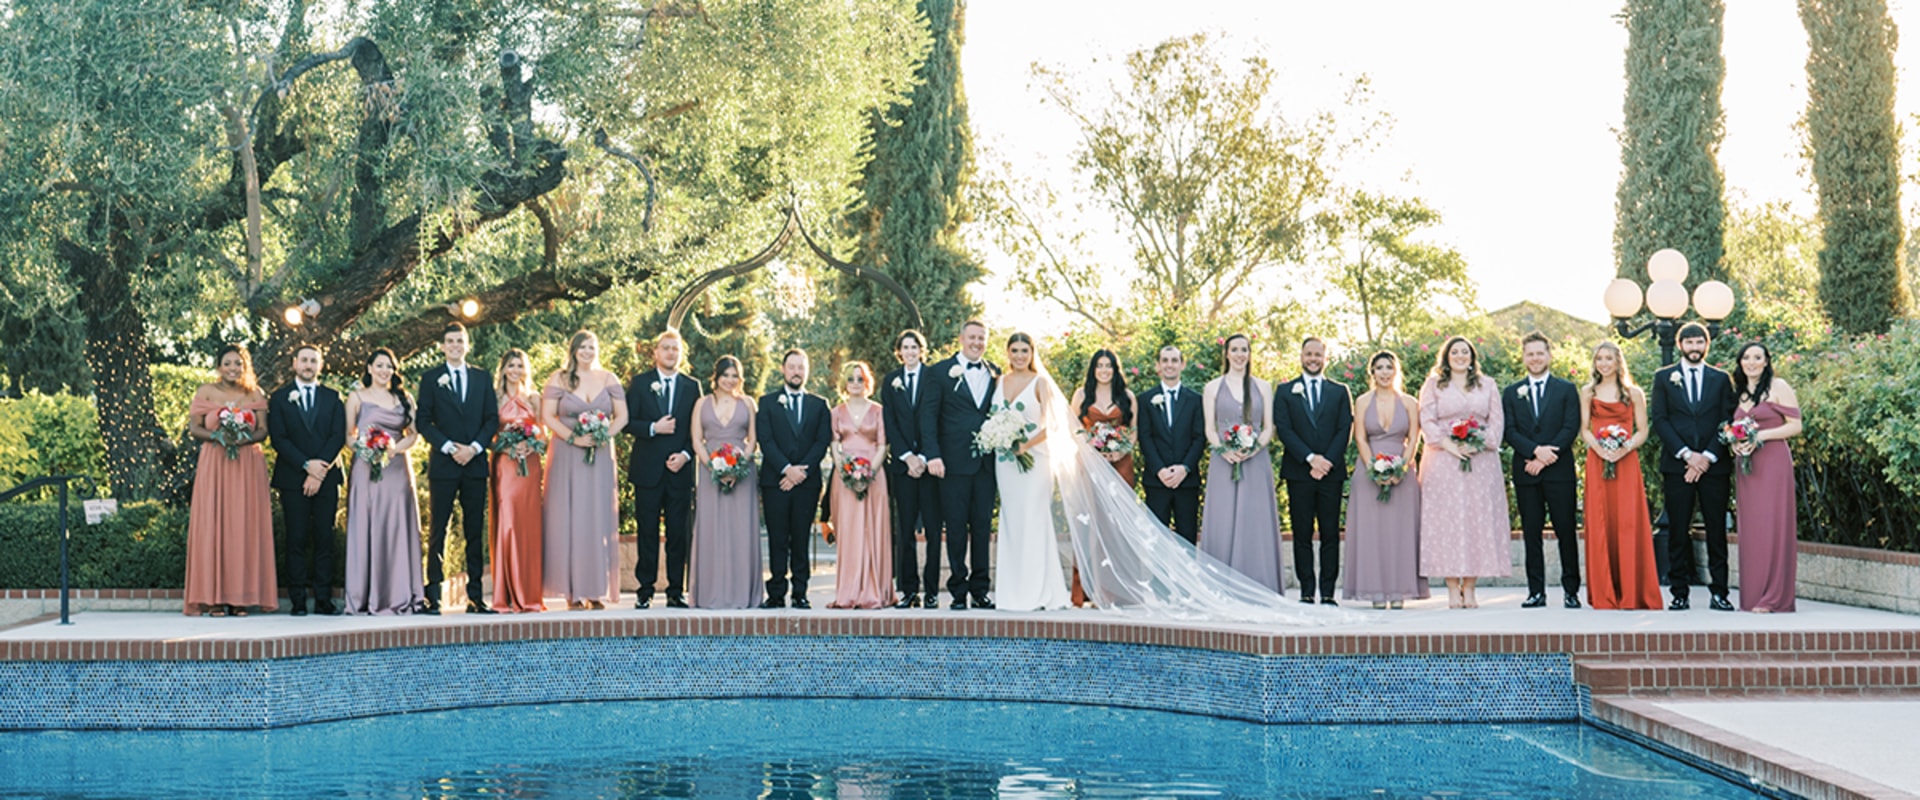 A Complete Guide to Historic Mansion Weddings in Arizona